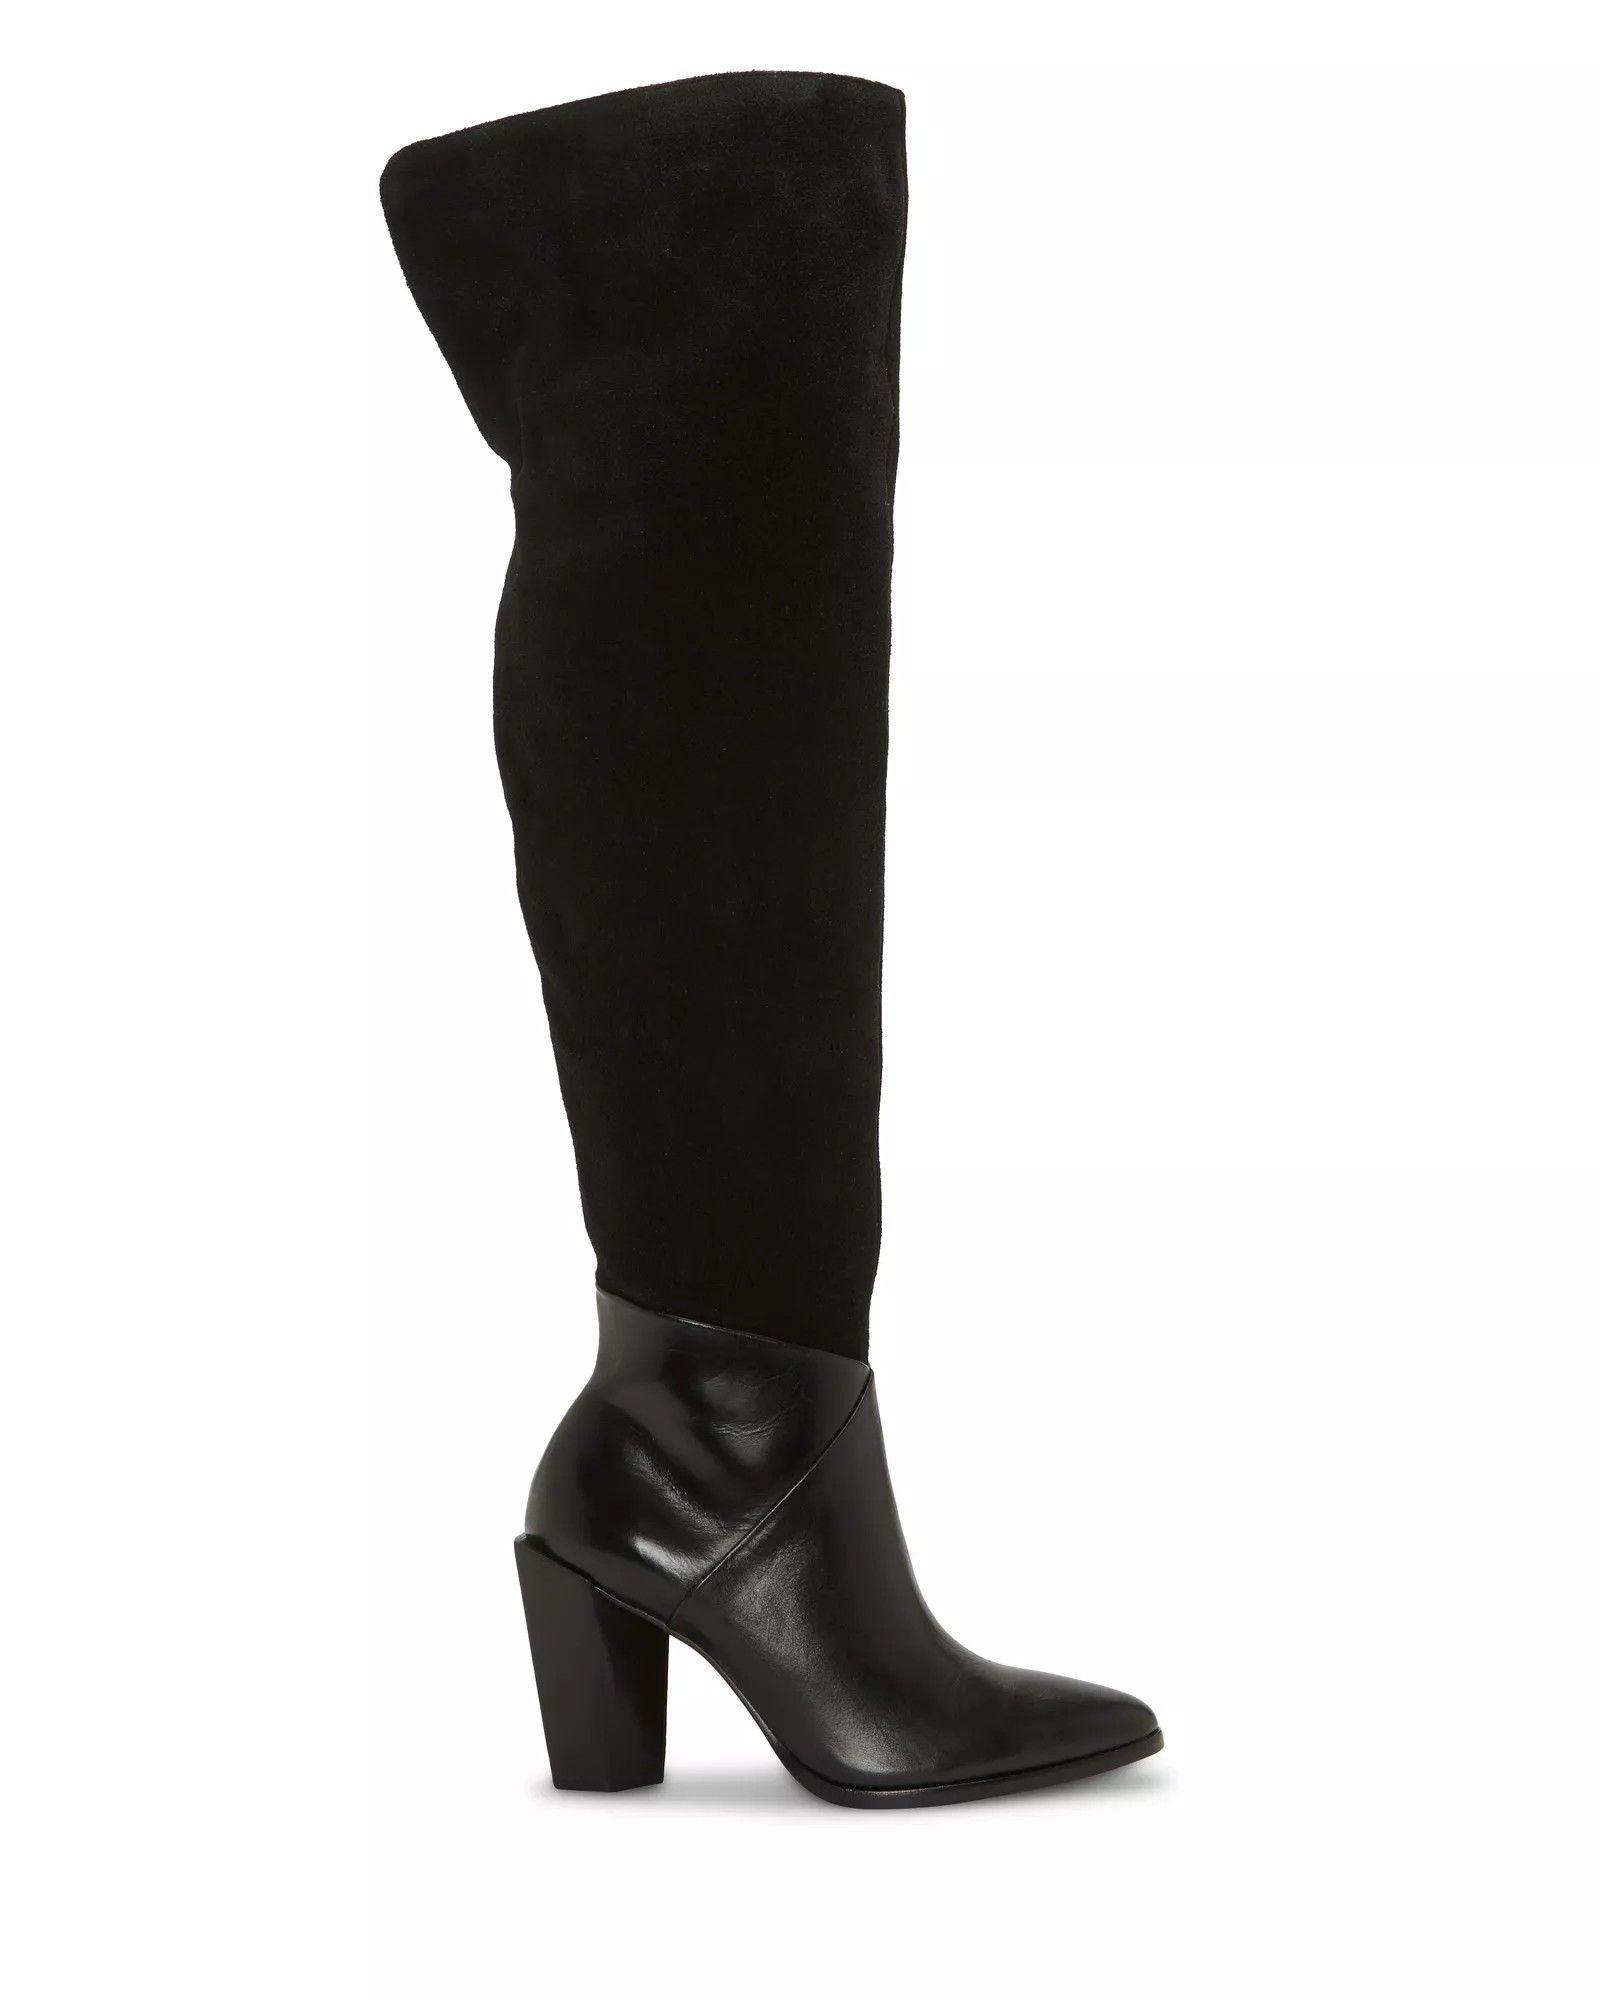 Vince Camuto Eynizela Over The Knee Boot | Vince Camuto